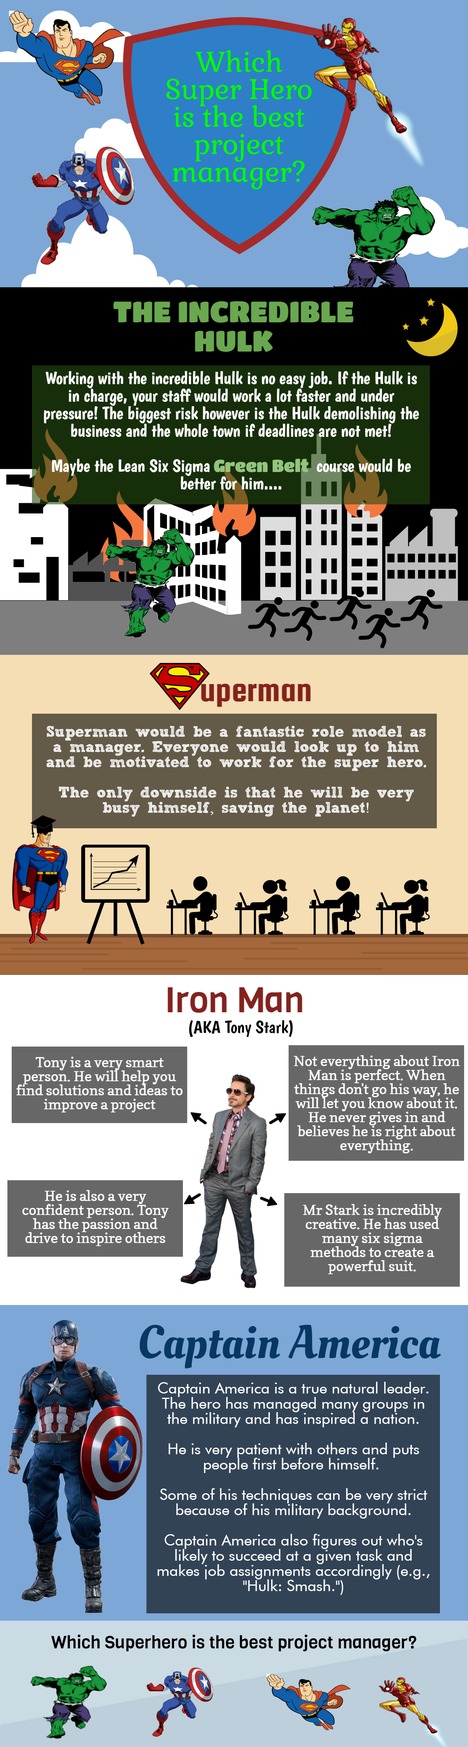 Which Superhero is the Best Project Manager?